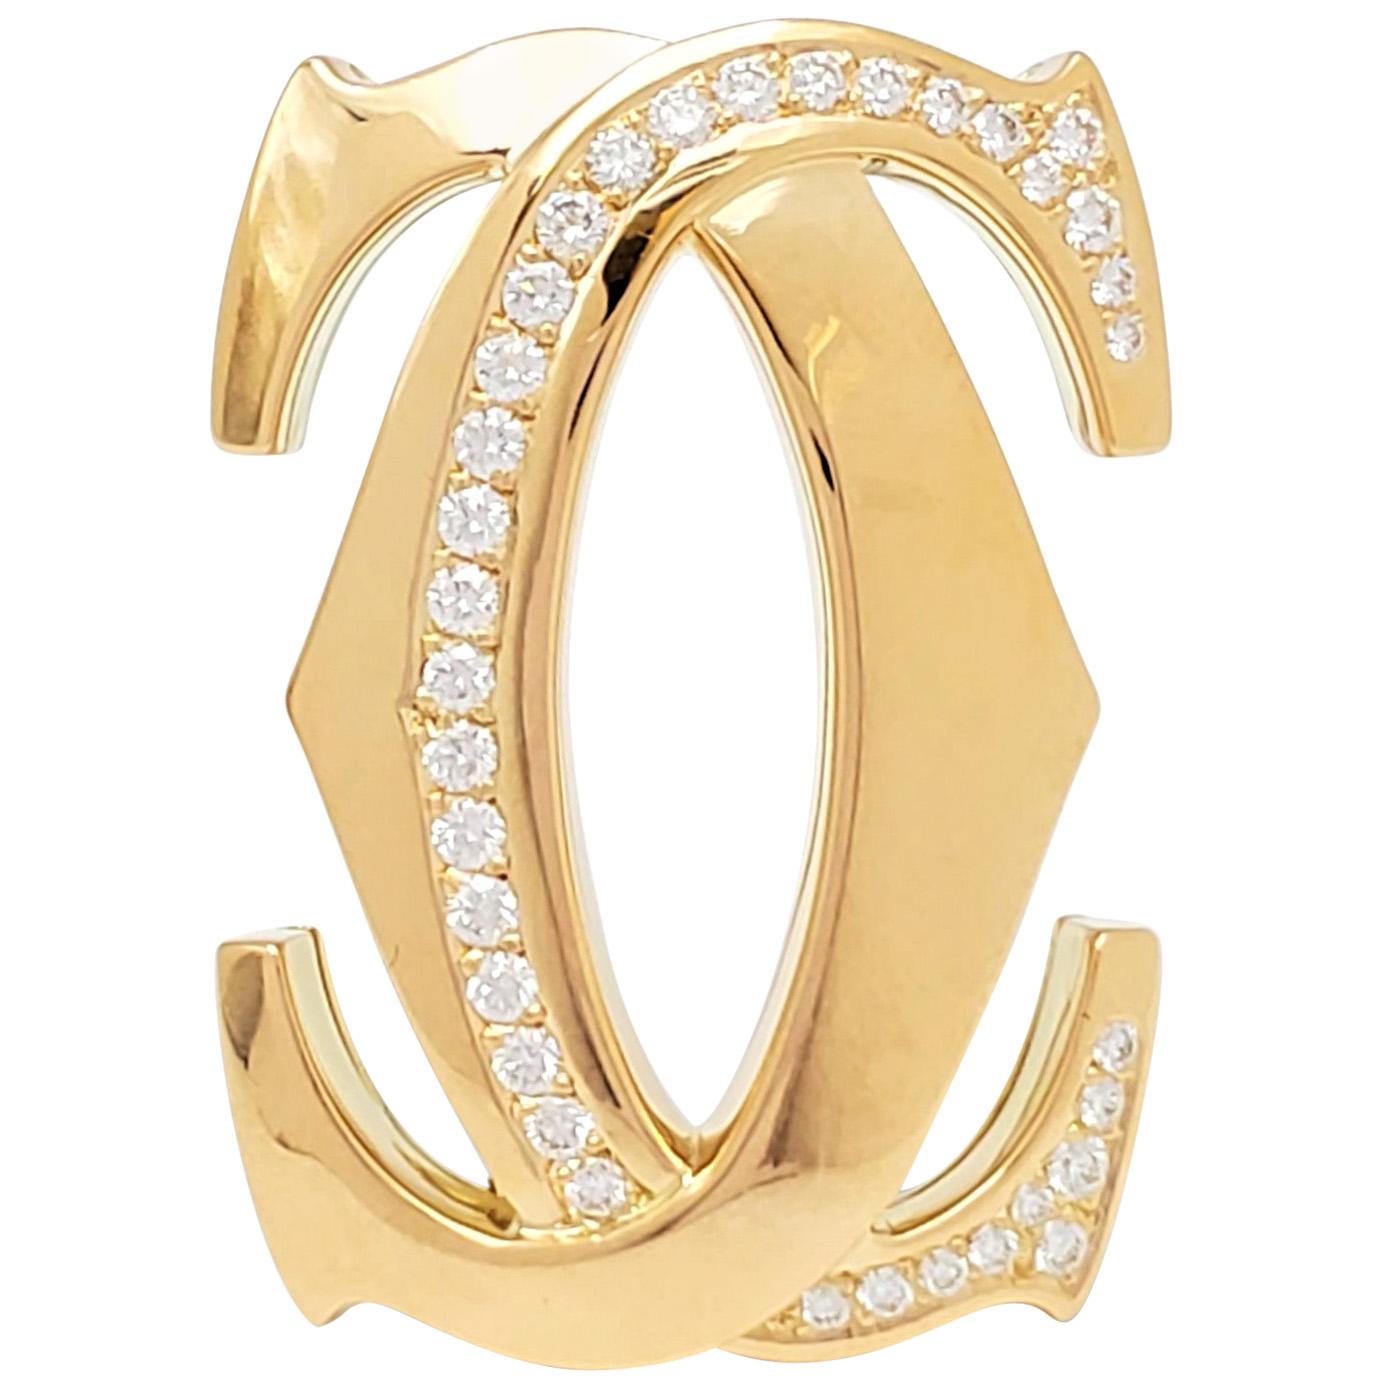 Cartier 'Penelope' Double-C Yellow Gold and Diamond Pin